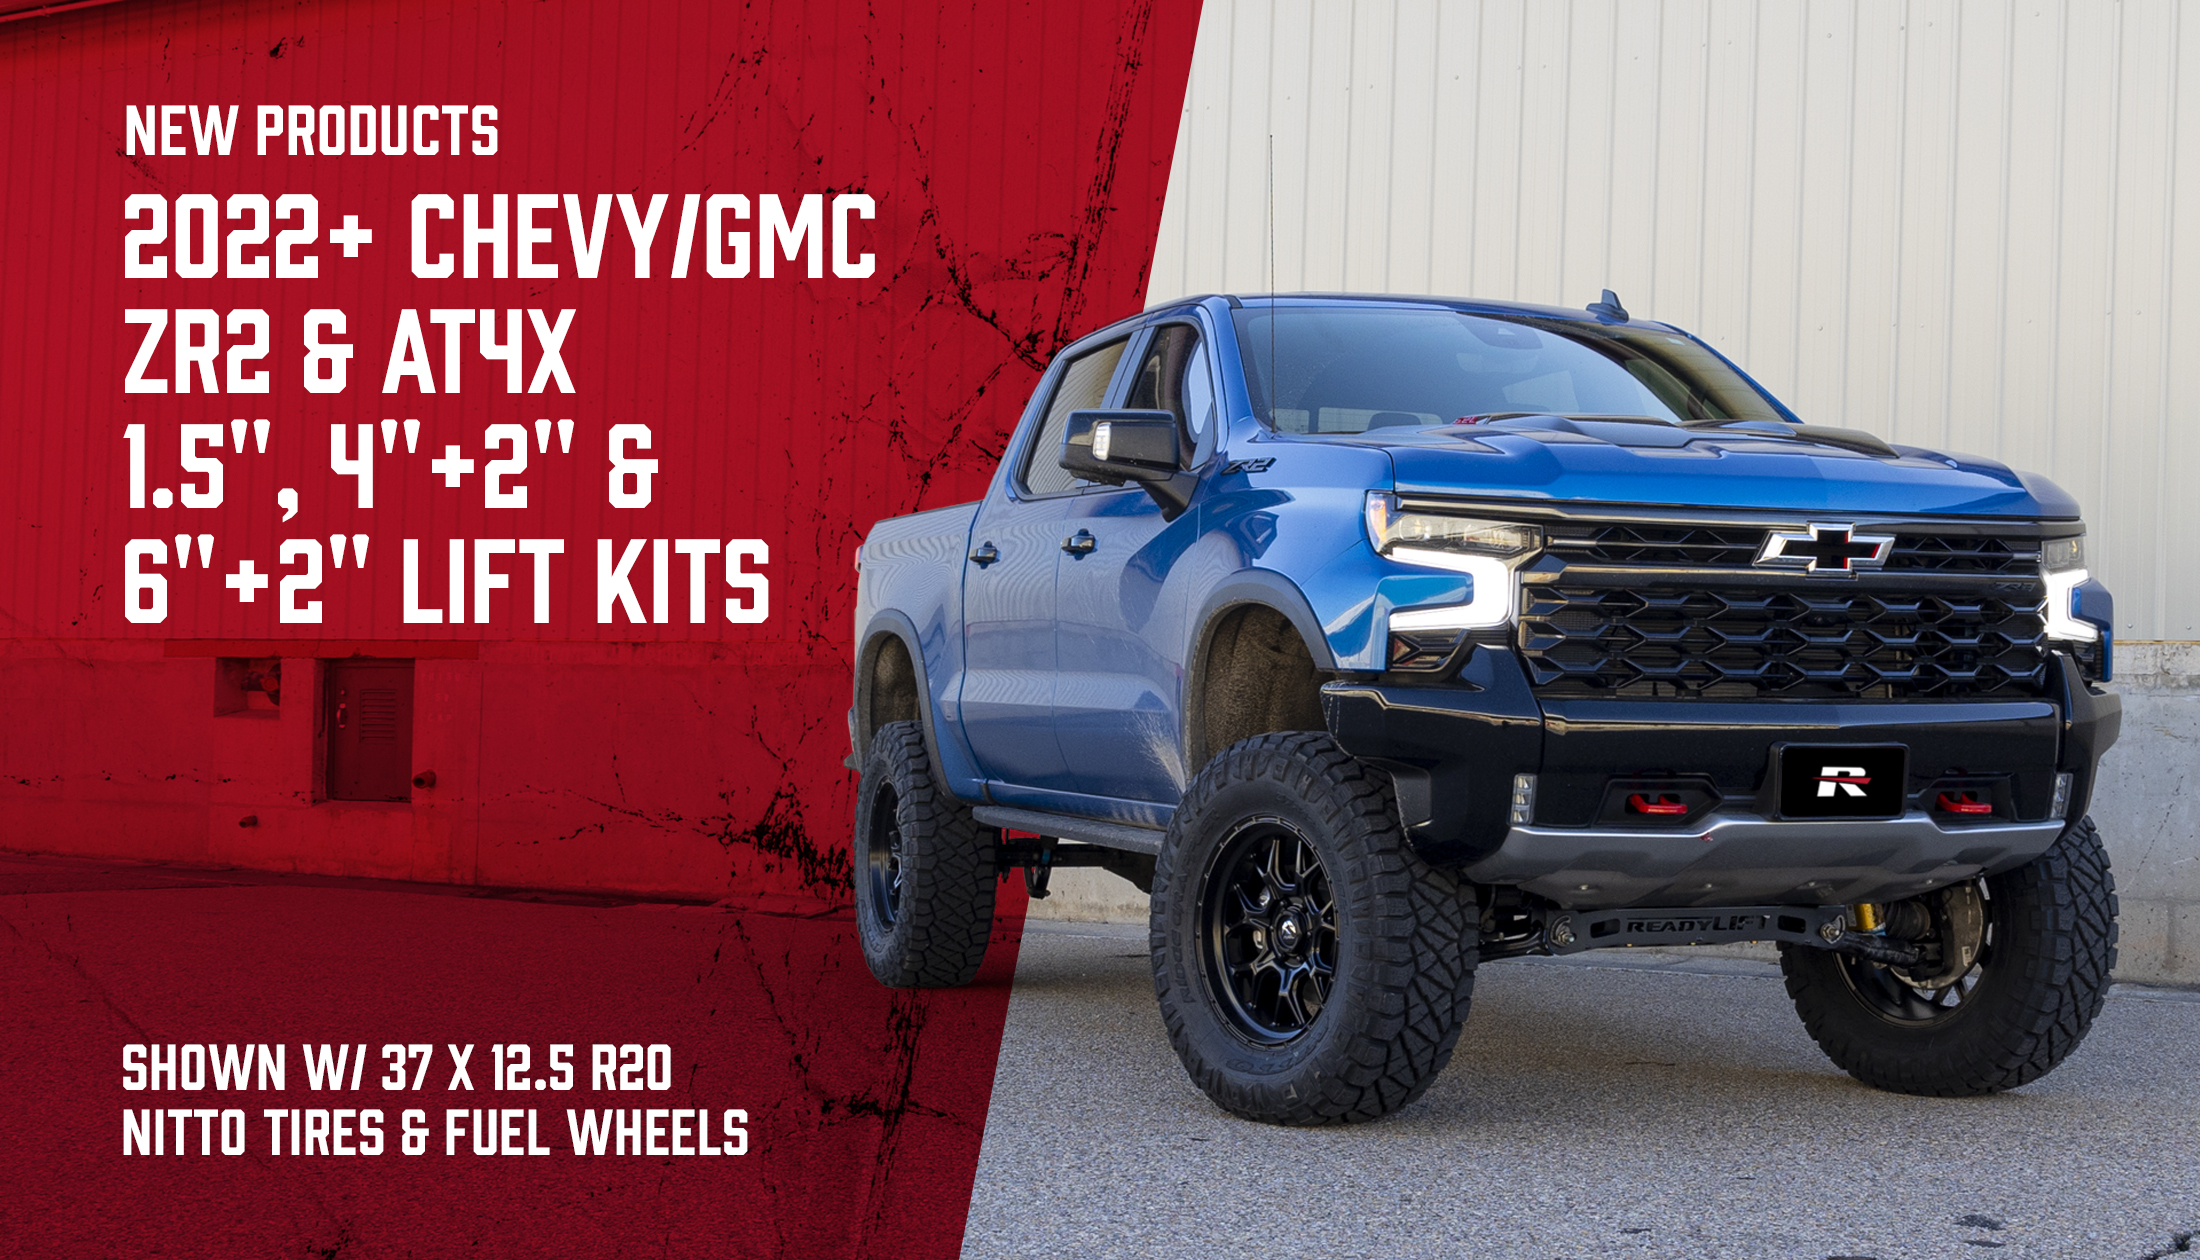 All-New Leveling and Big Lift Kits 2022-2023 Chevy/GMC 1500 ZR2 and AT4X